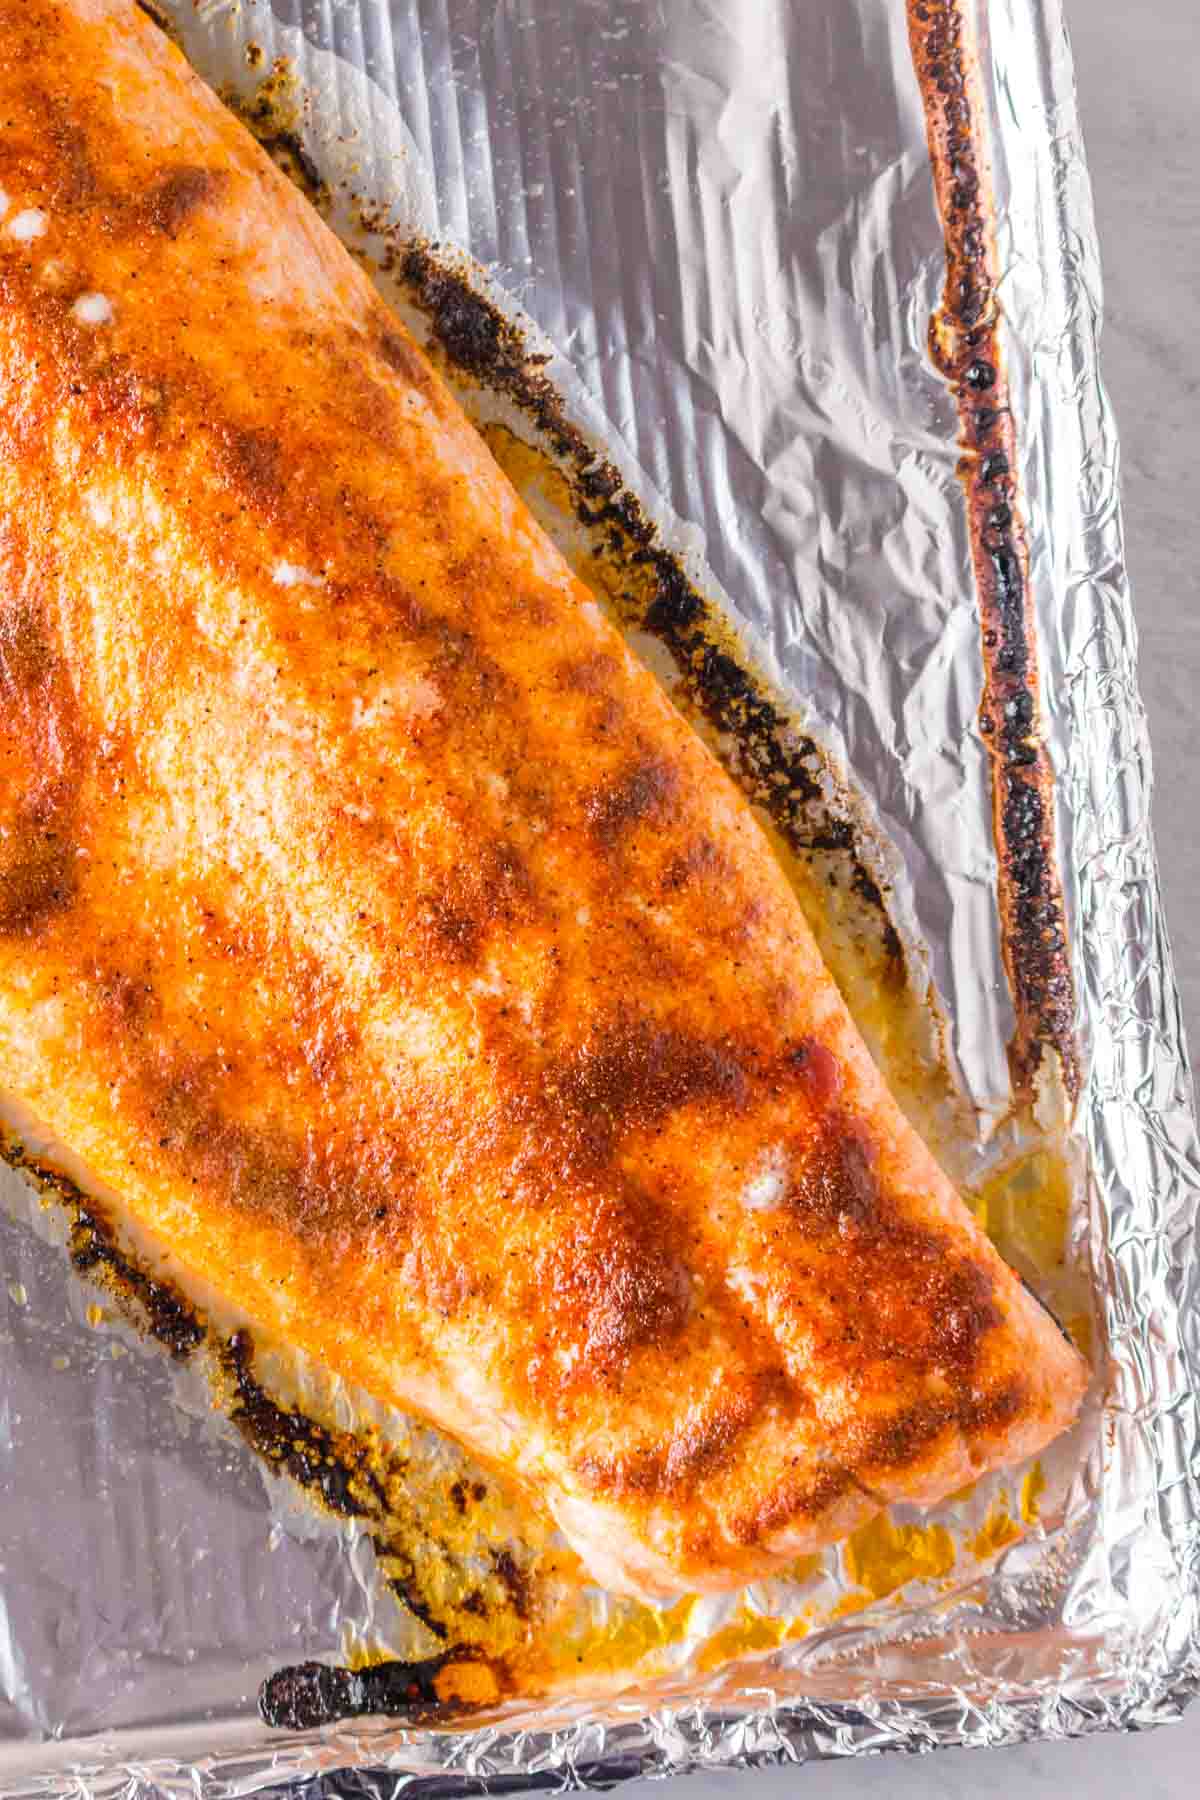 spiced and baked salmon filet over tin foil